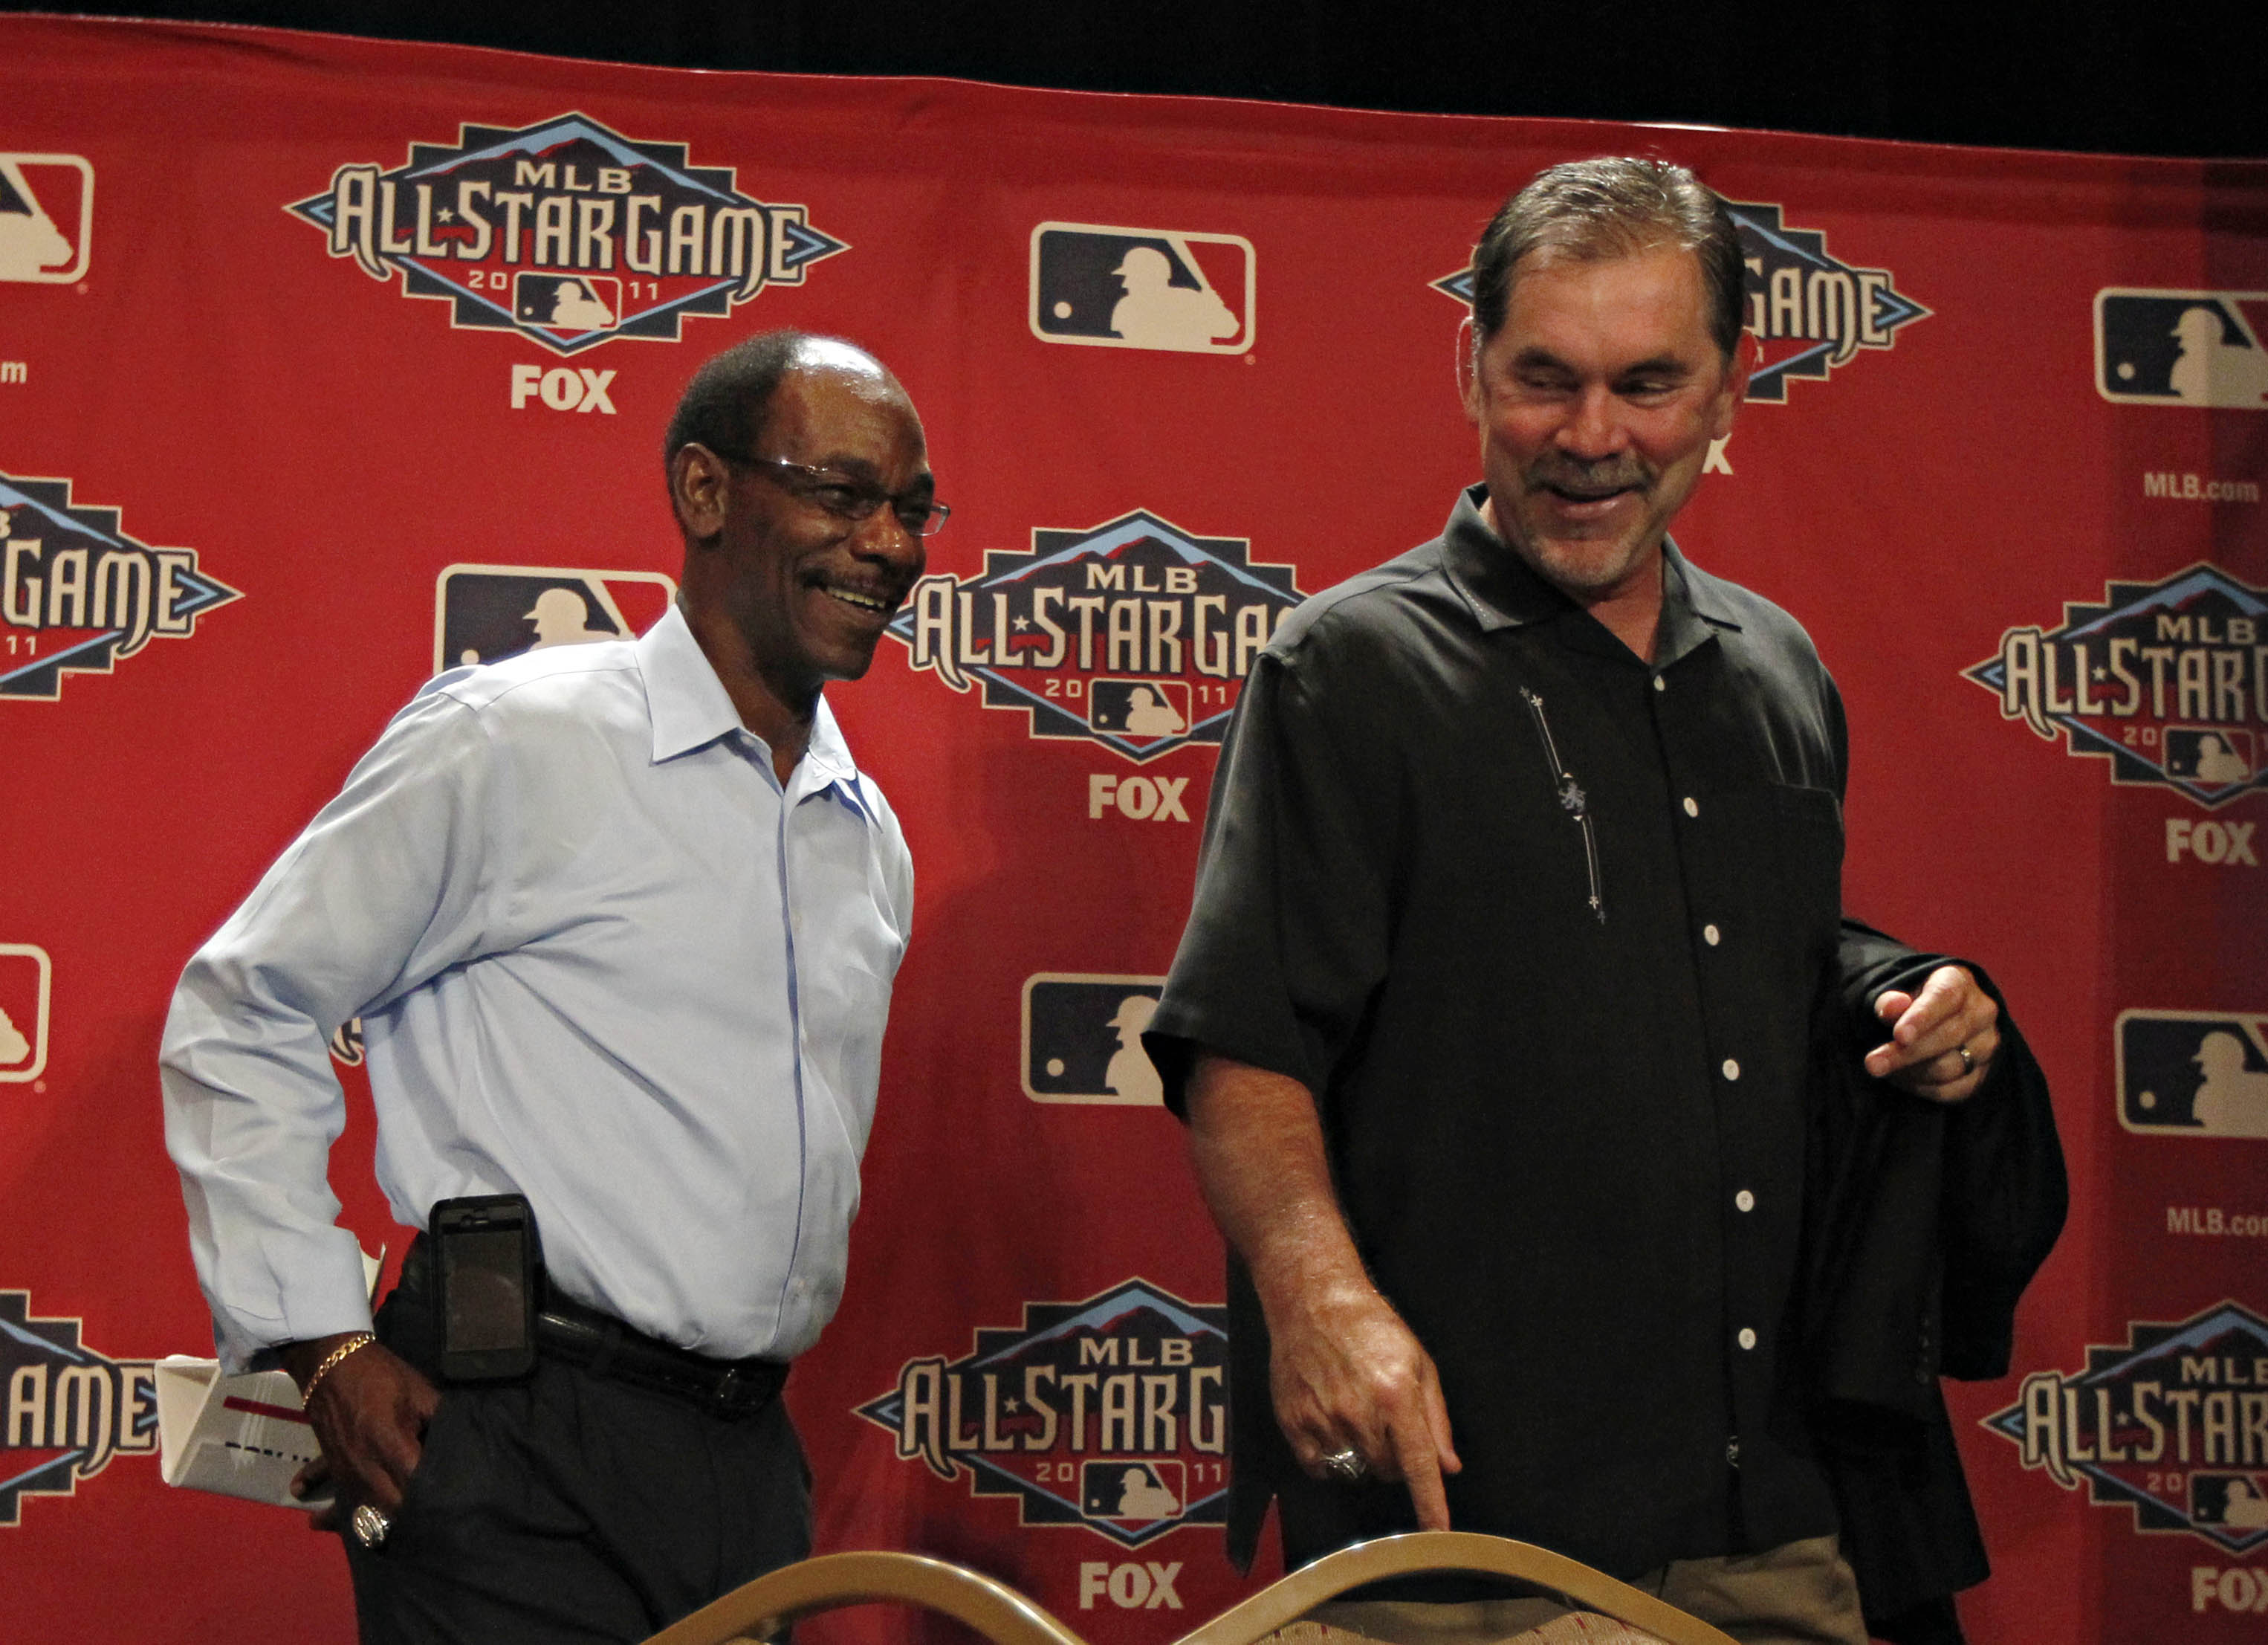 10 things to know about new Rangers manager Bruce Bochy